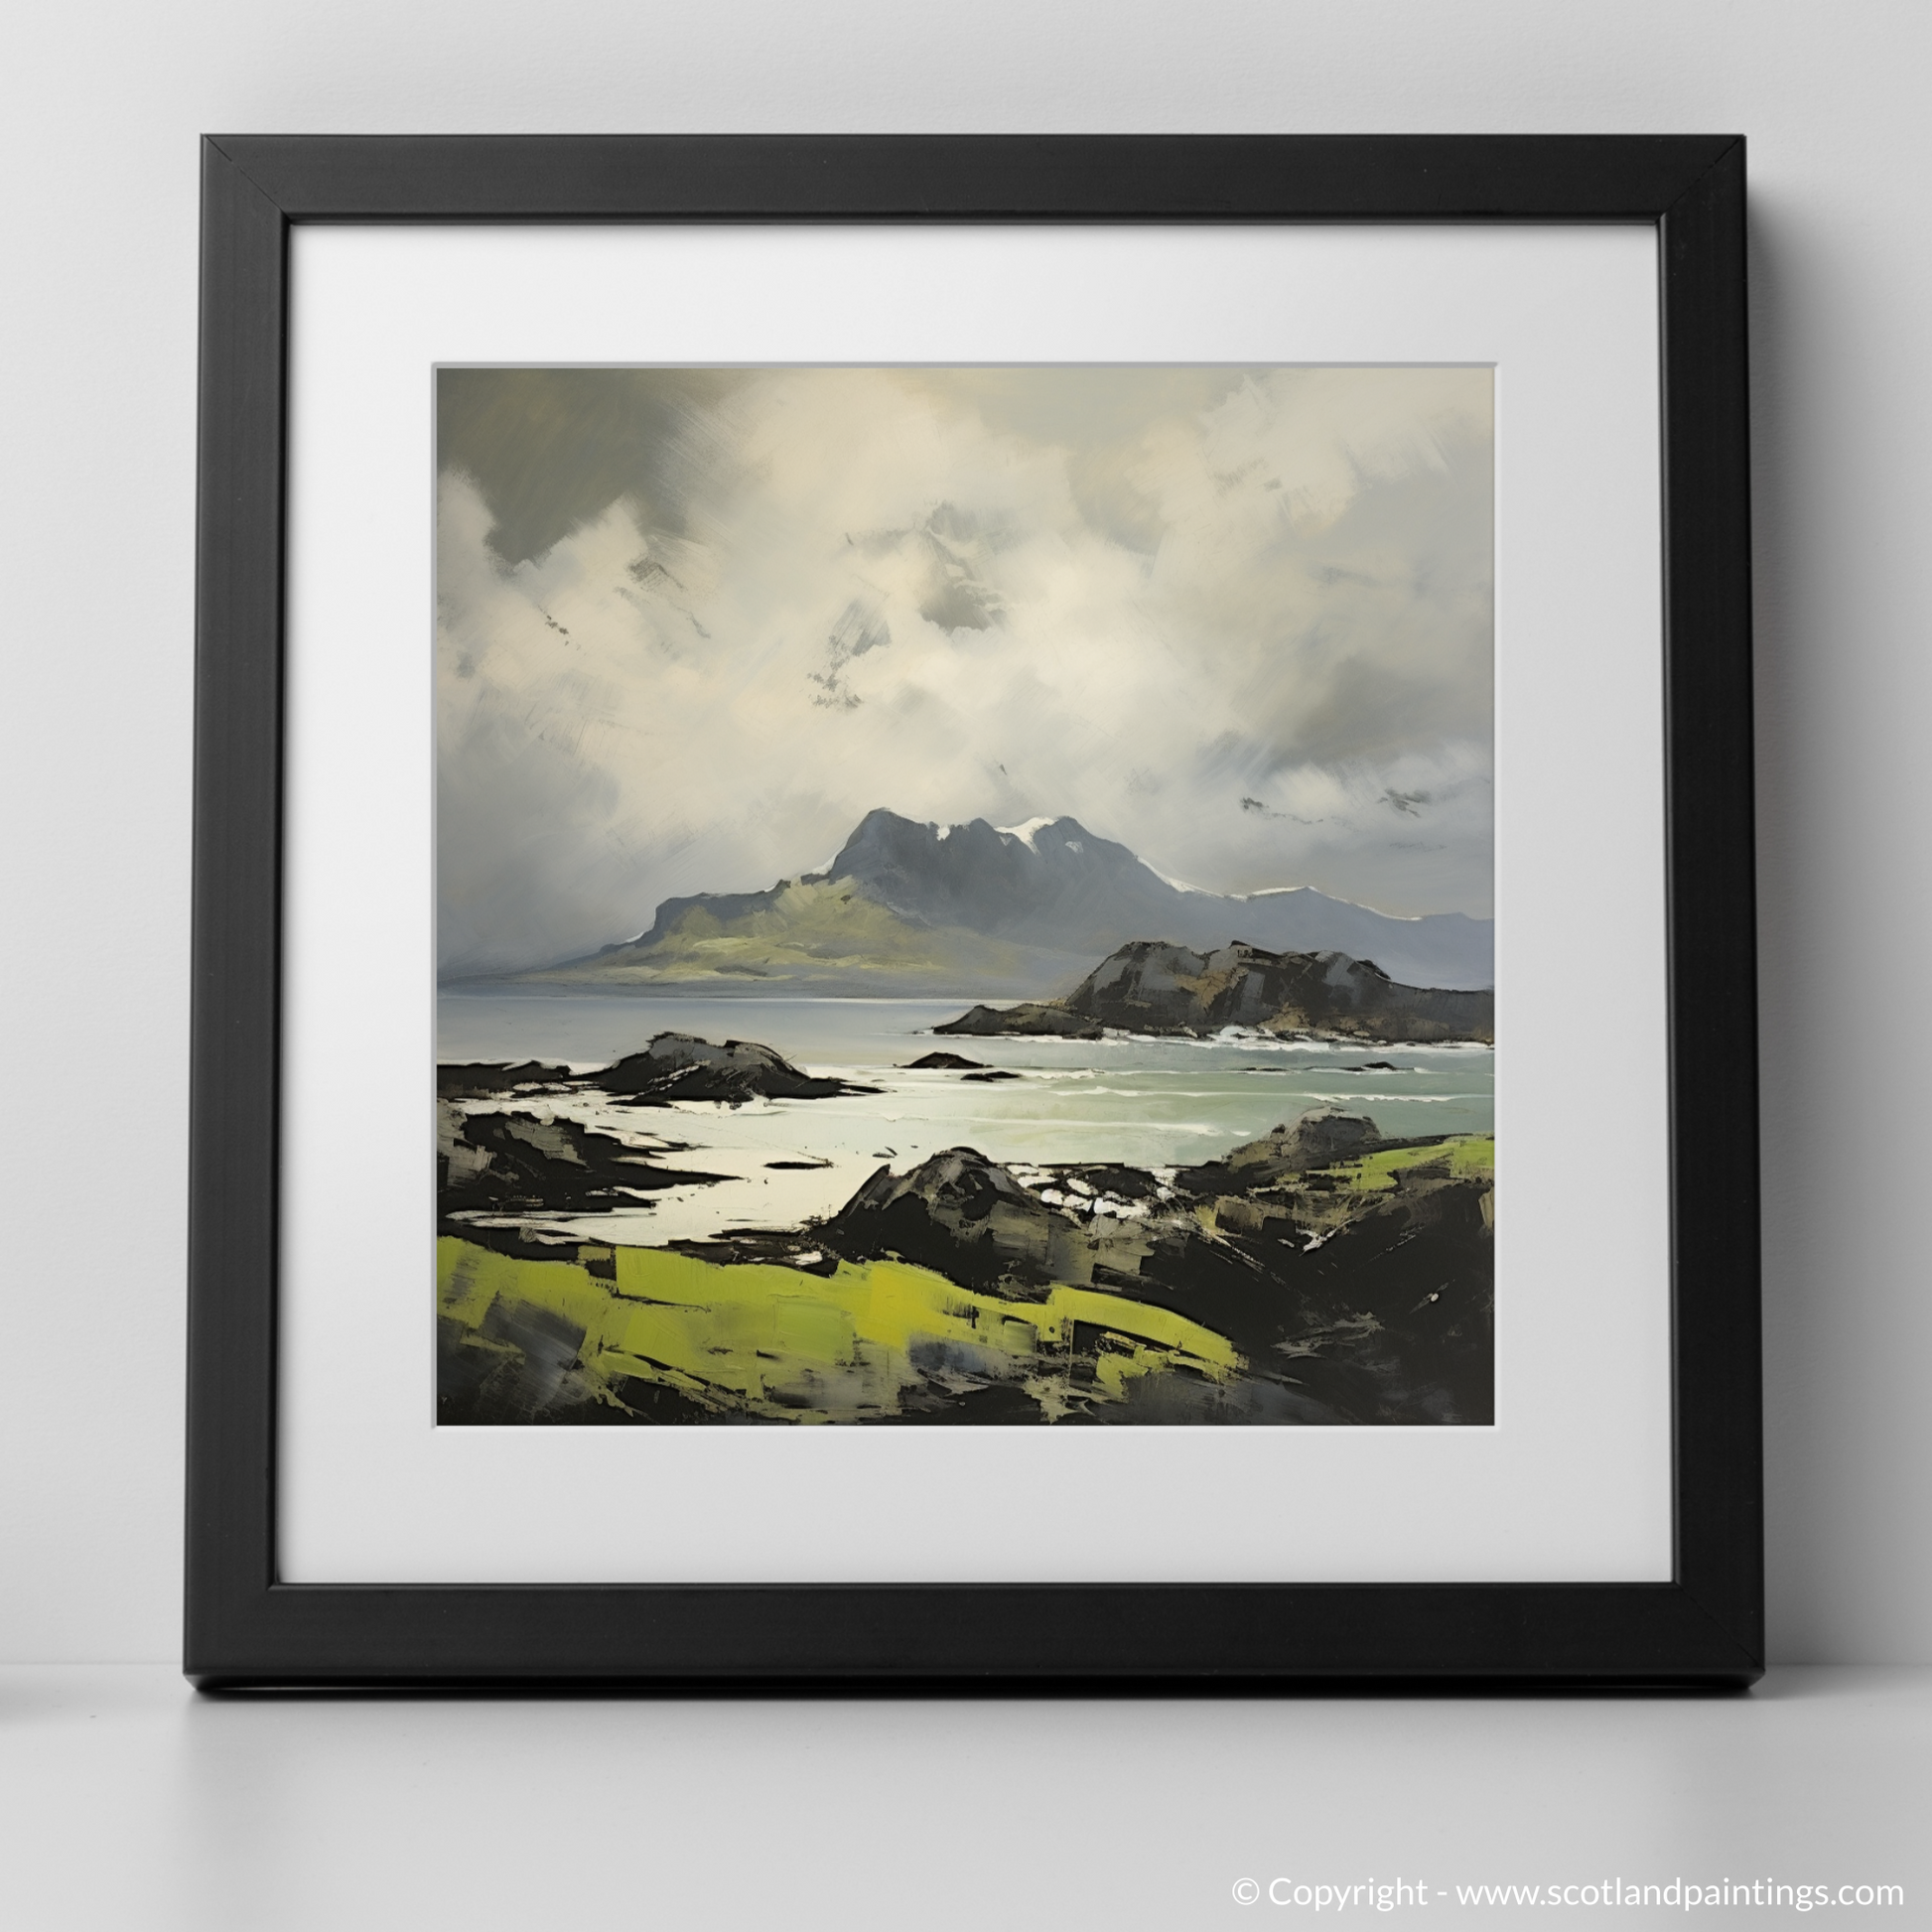 Art Print of Isle of Eigg, Inner Hebrides with a black frame